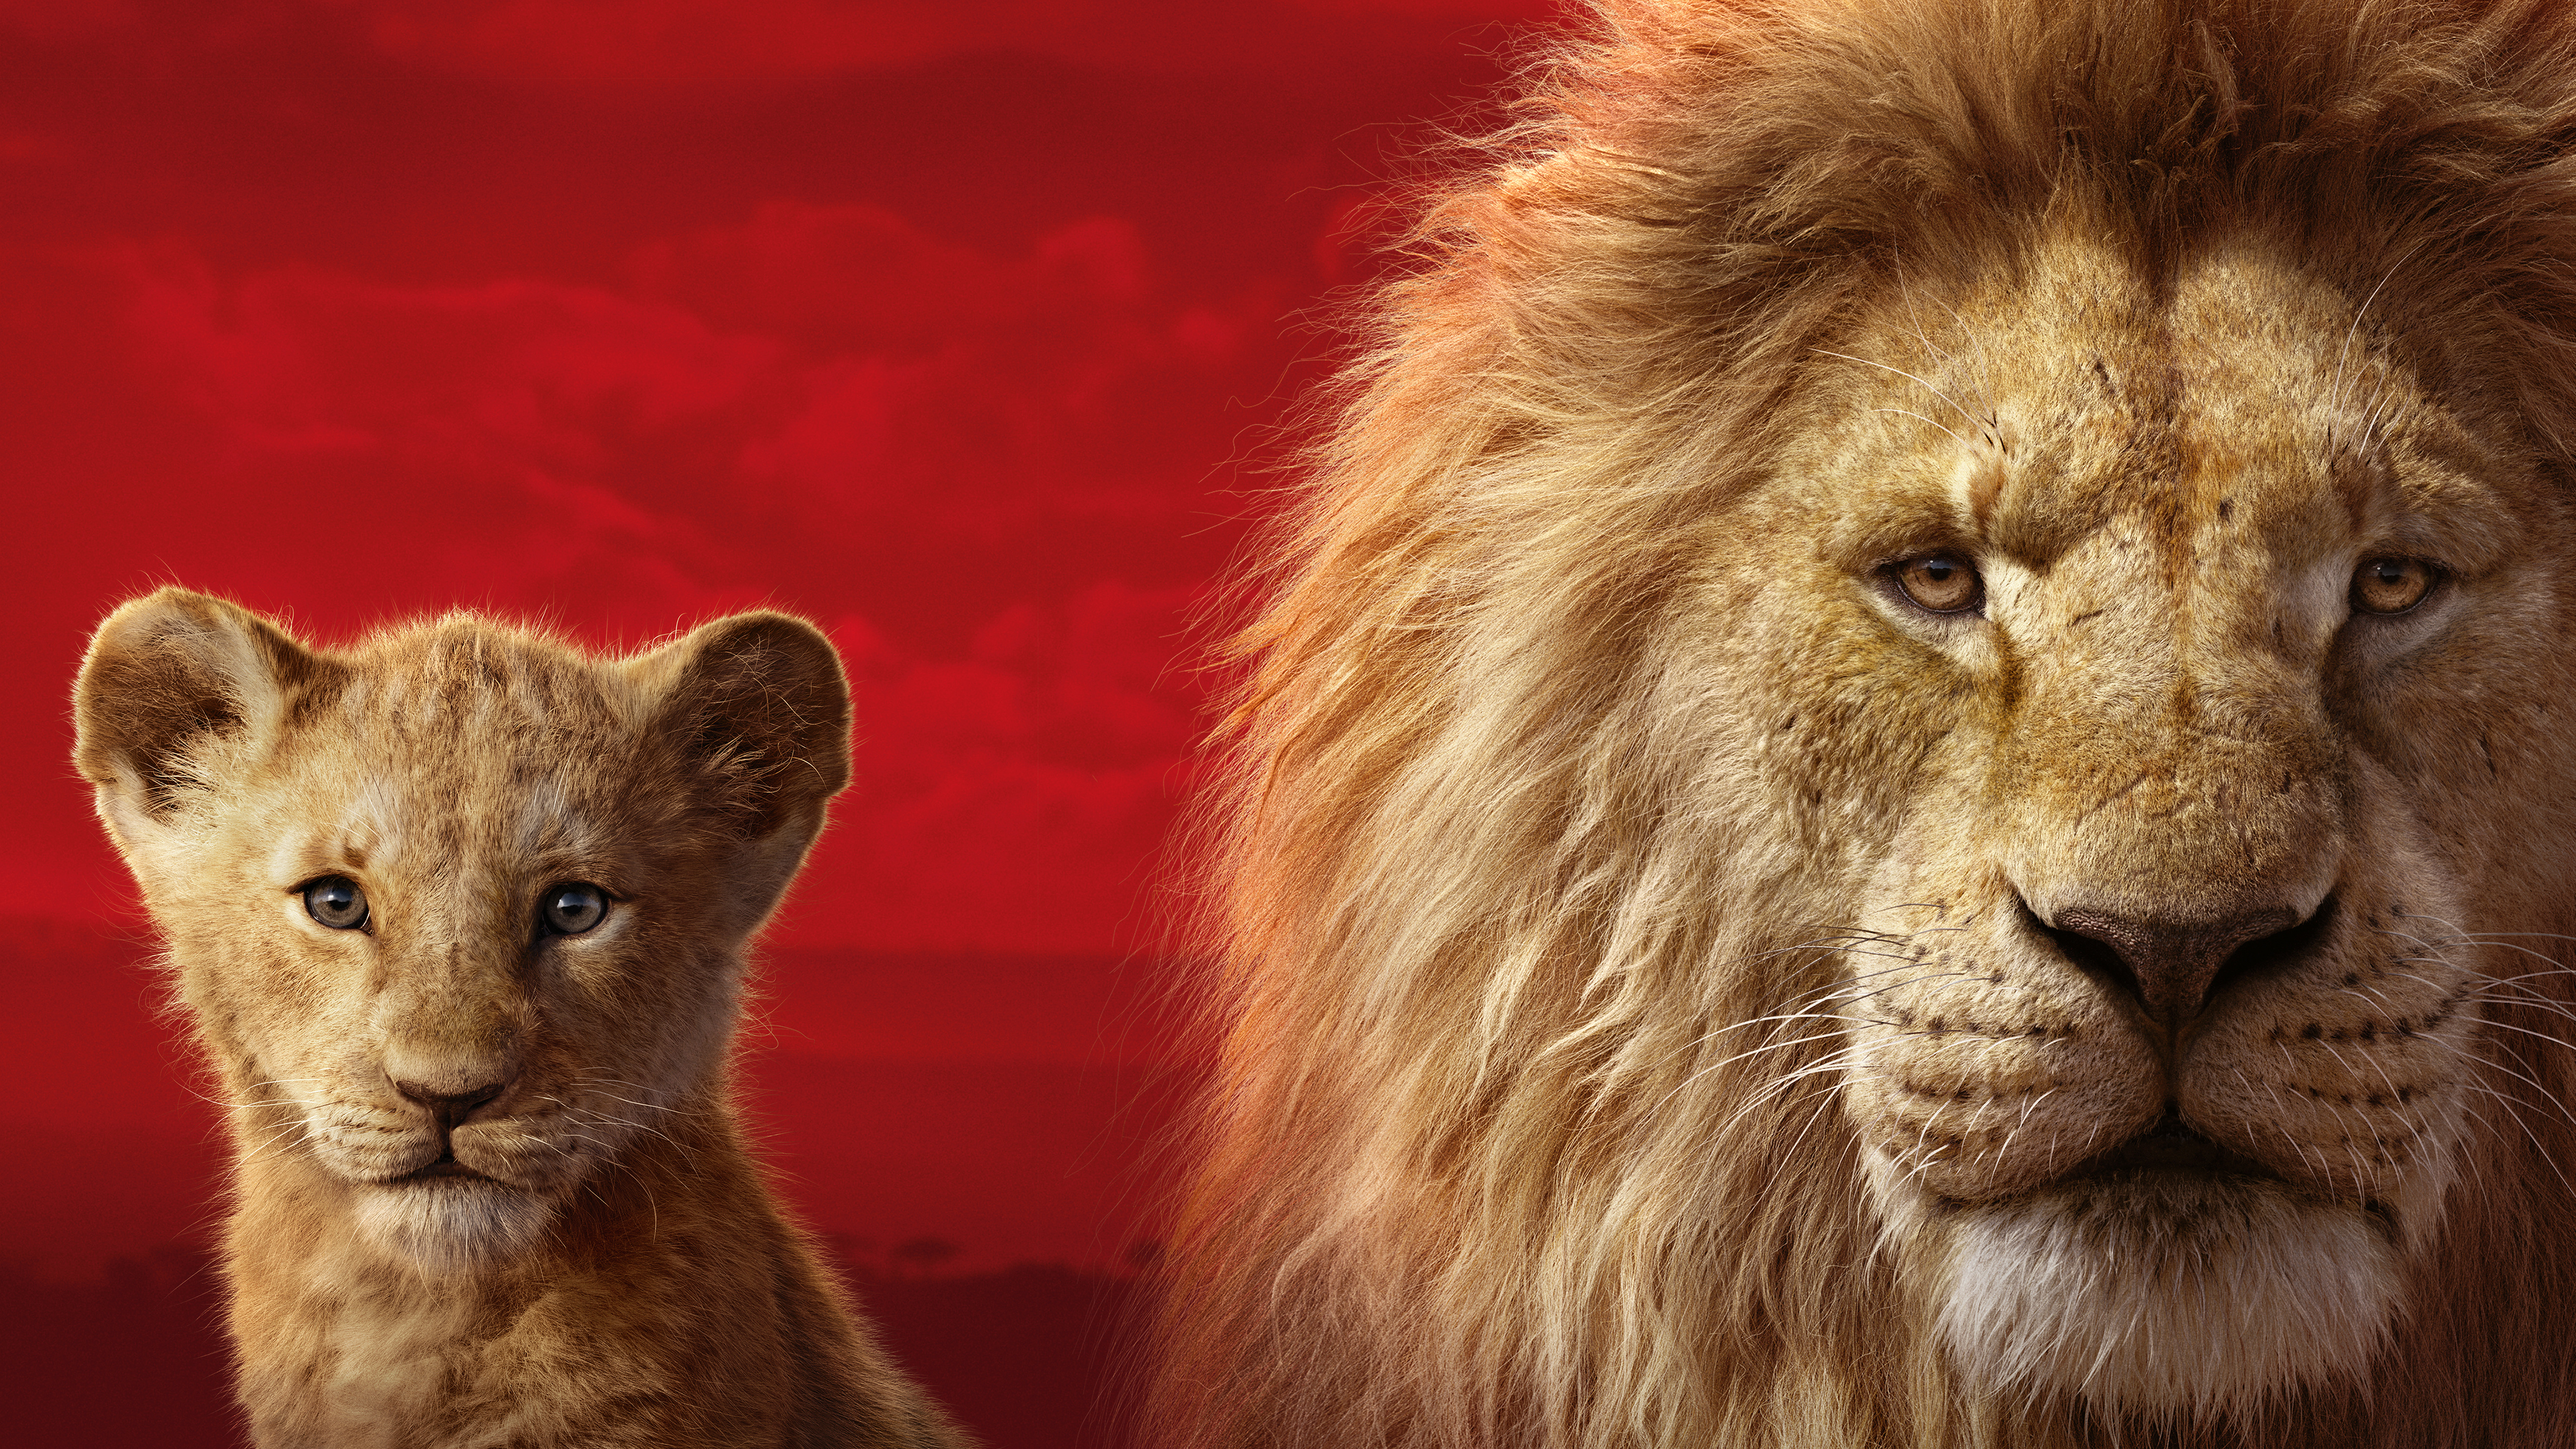 Simba In The Lion King 2019 Movie Wallpapers